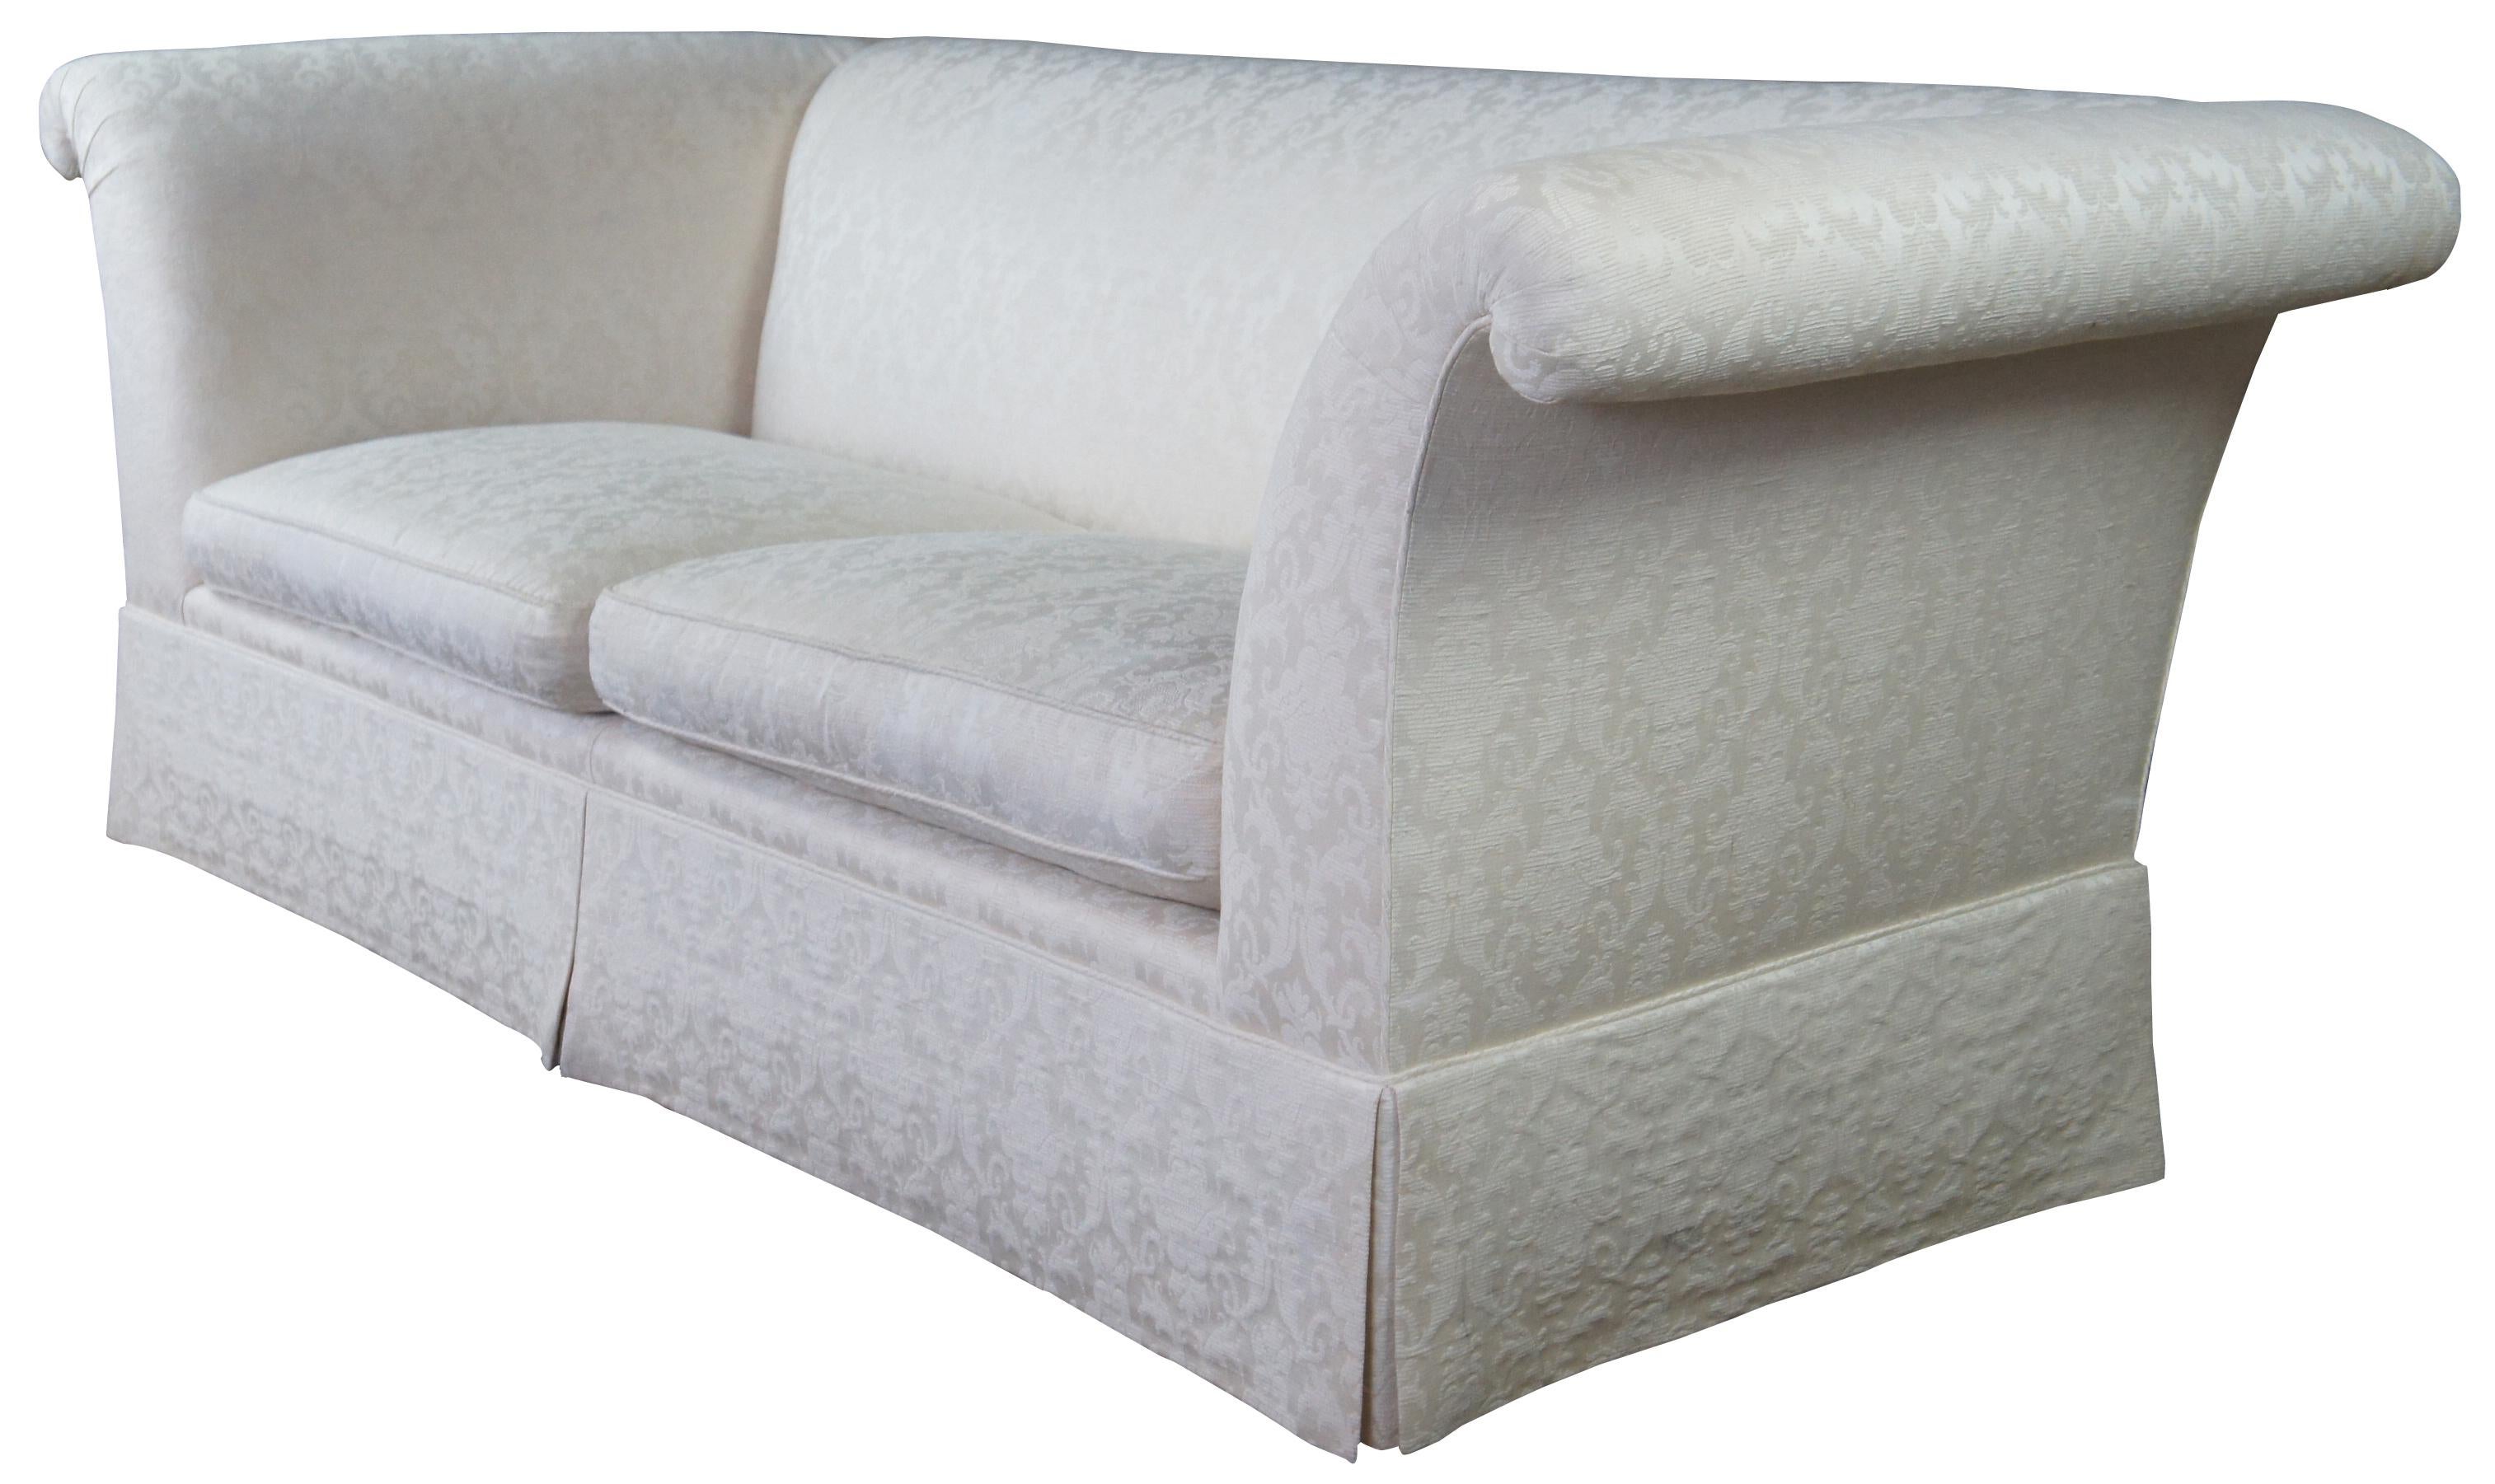 Late 20th Century Vintage Baker Furniture Tuxedo sofa. A rectangular form upholstered in a white French brocade with flared arms.  Includes two removable down filled seat cushions.   
 